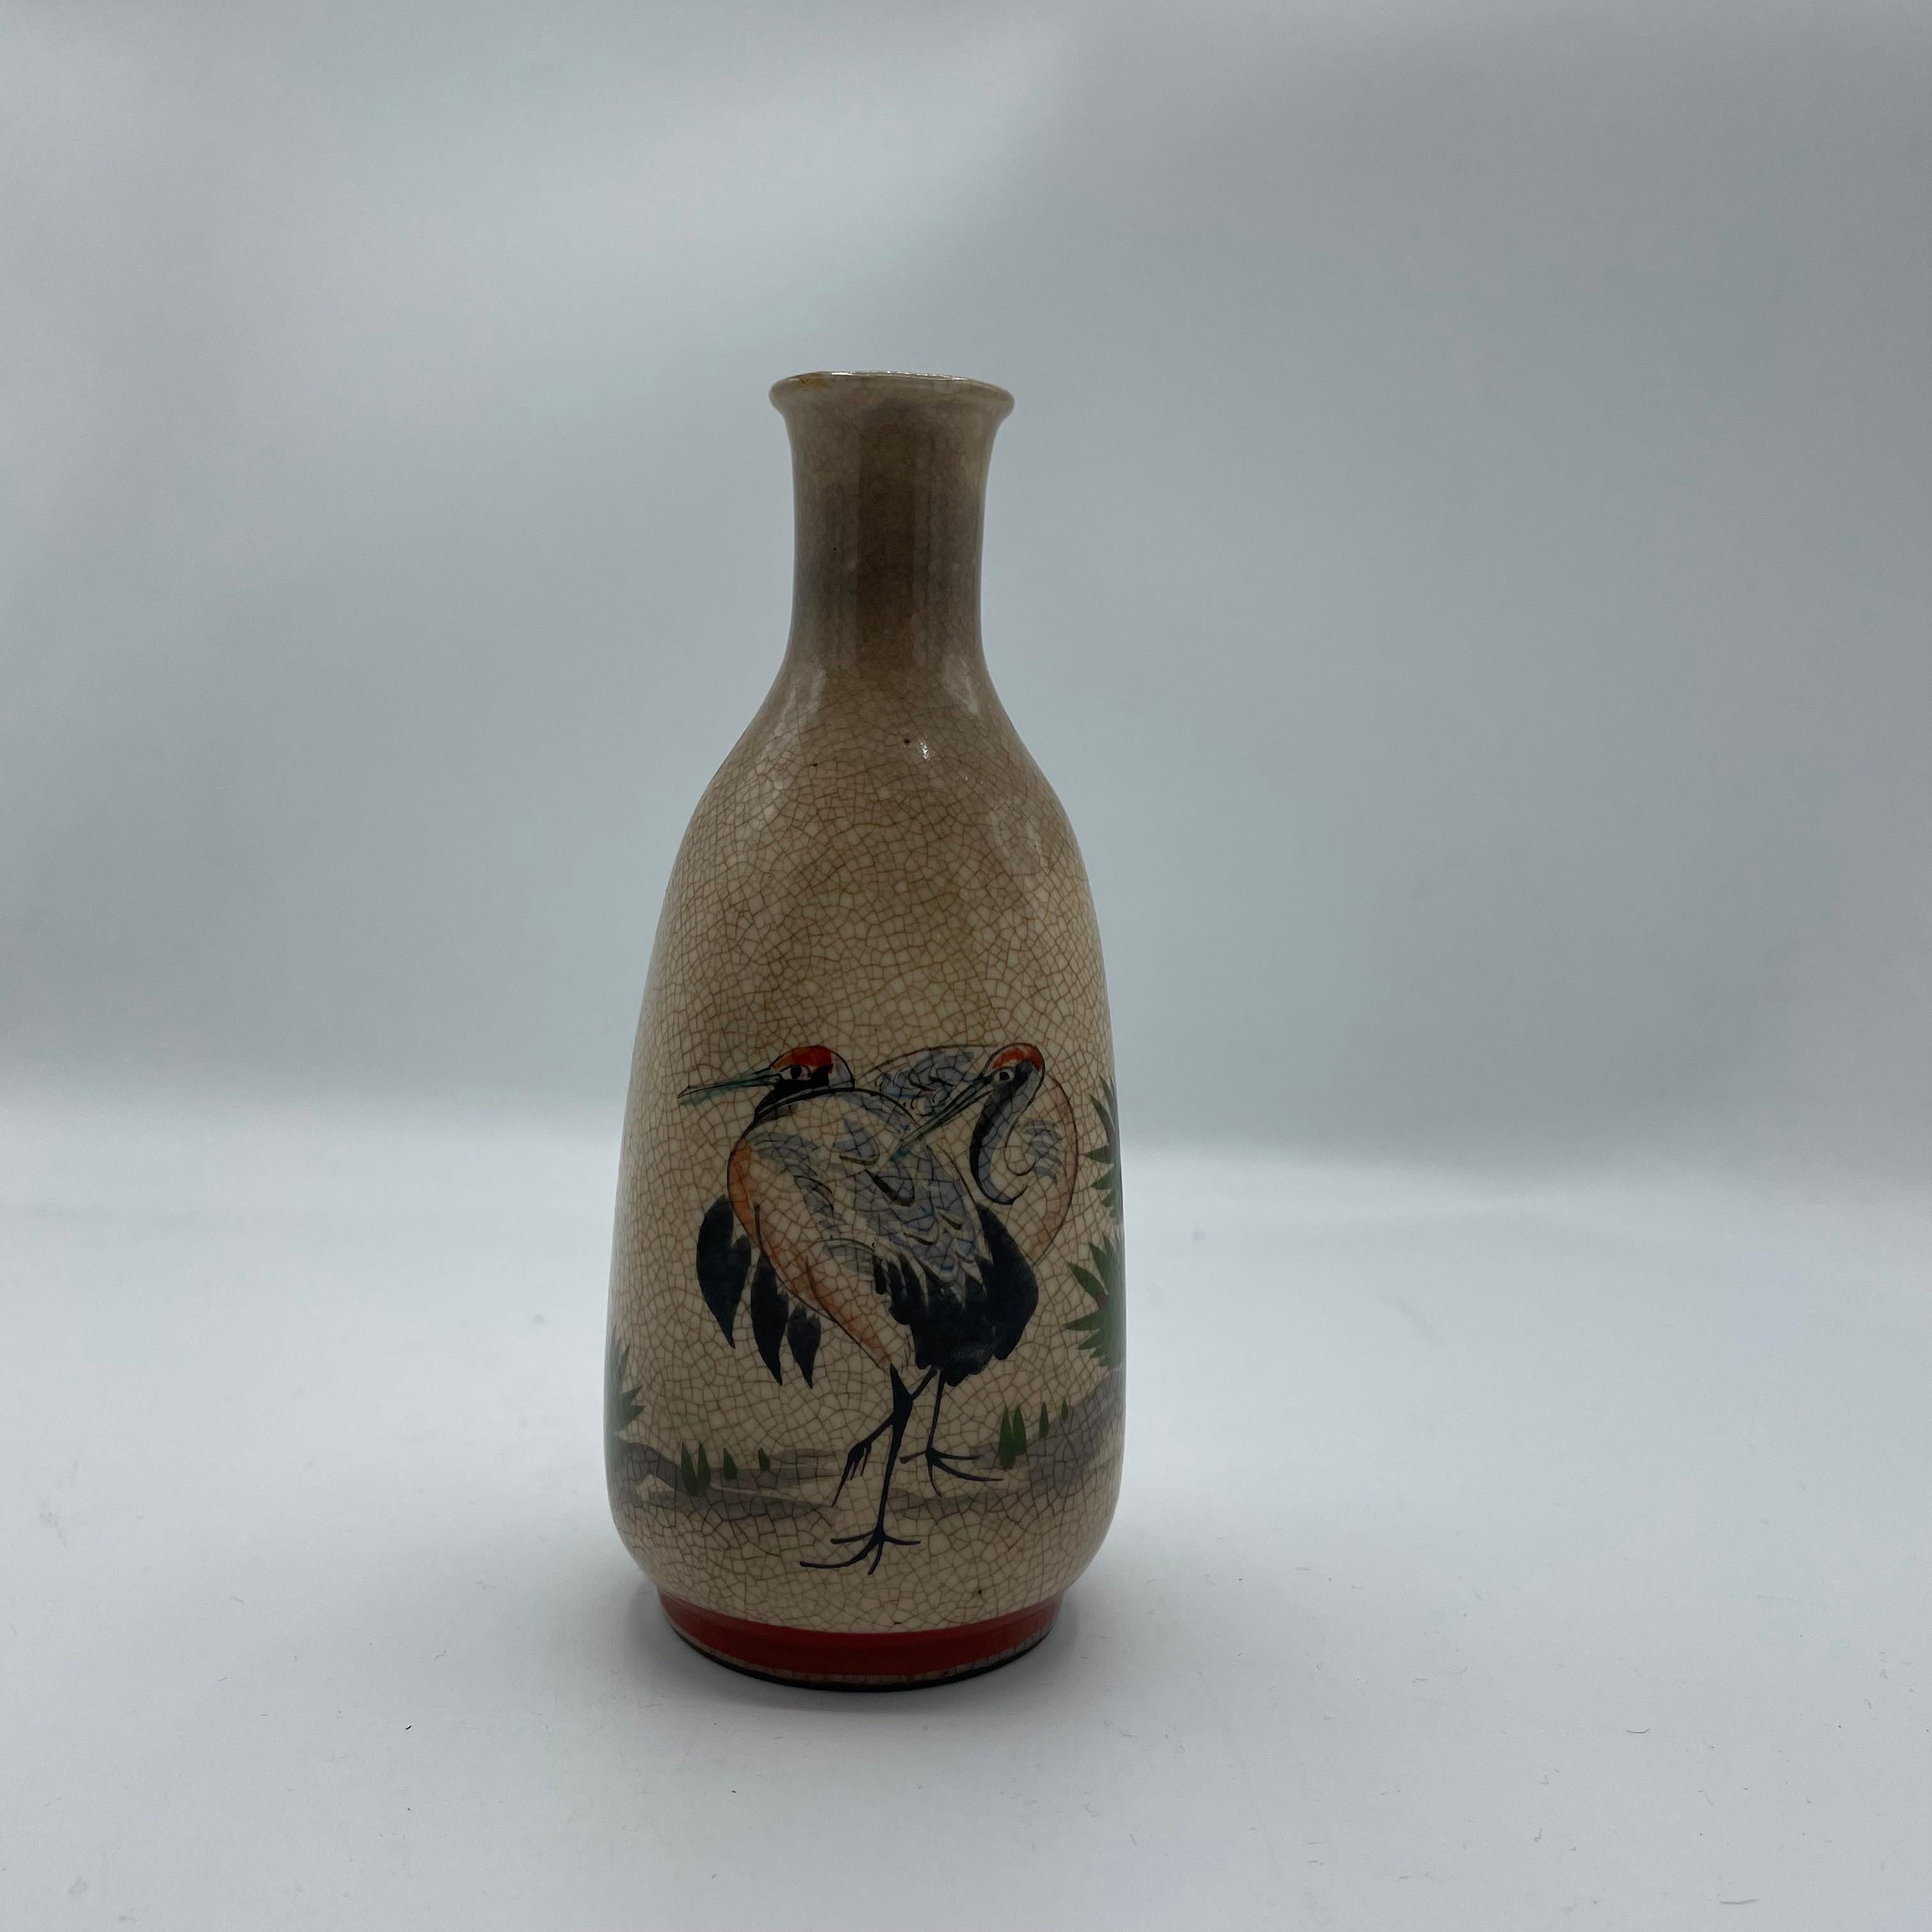 This is a bottle for sake. It can be used as a bottle and also as a flower vase.
This was made in Japan around 1960s in Showa era and it is made with Porcelain.

Dimensions: 6,5 x 6,5 x H14,5 cm 